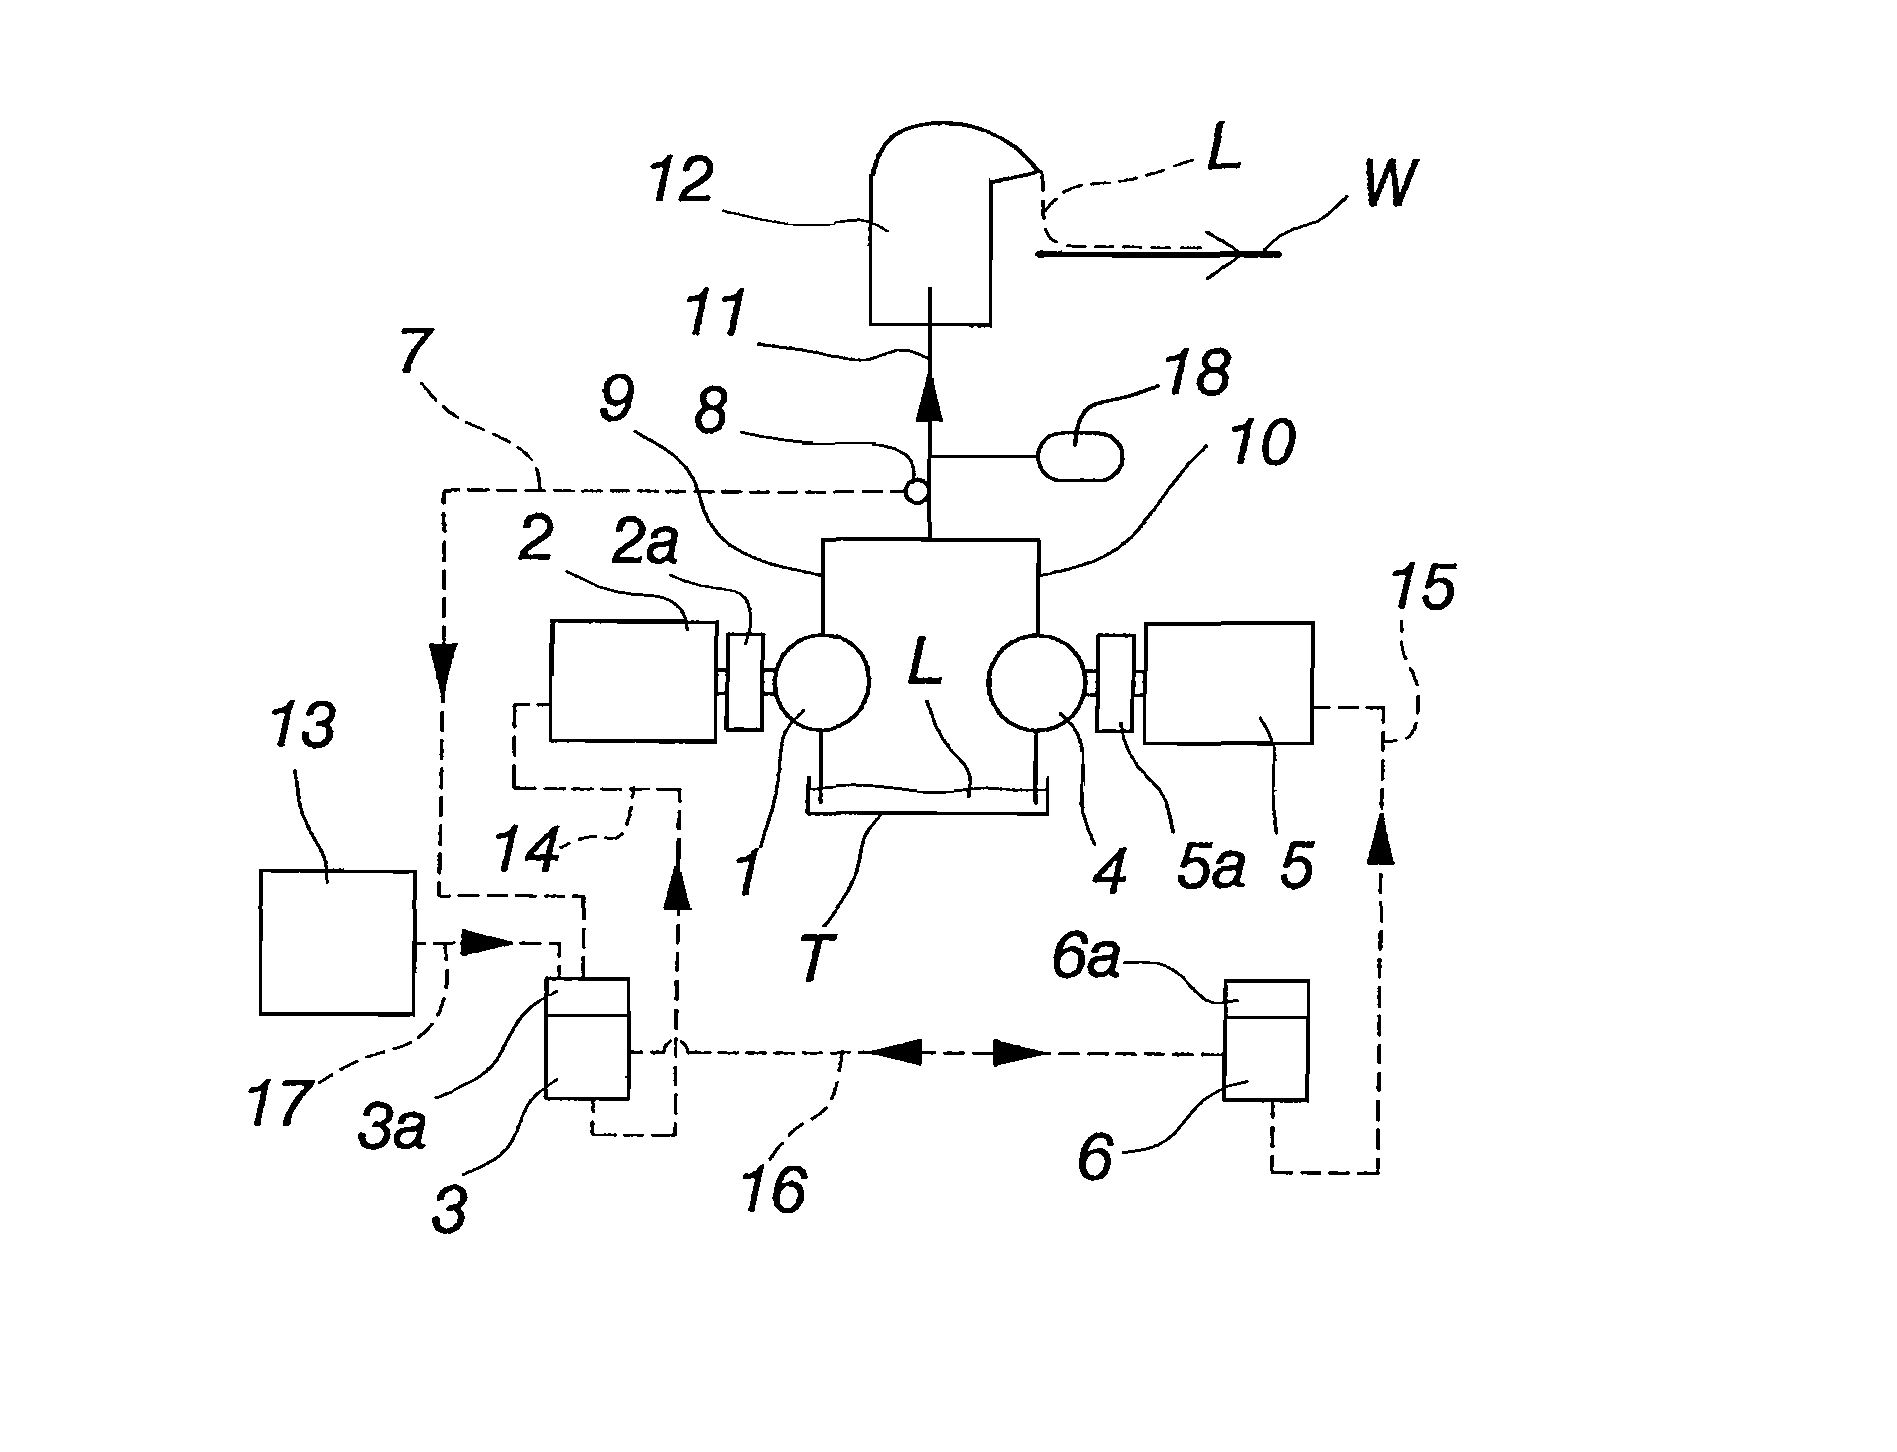 Method for supplying a chemical or chemical compound in a fibrous web machine and an apparatus for implementing the method